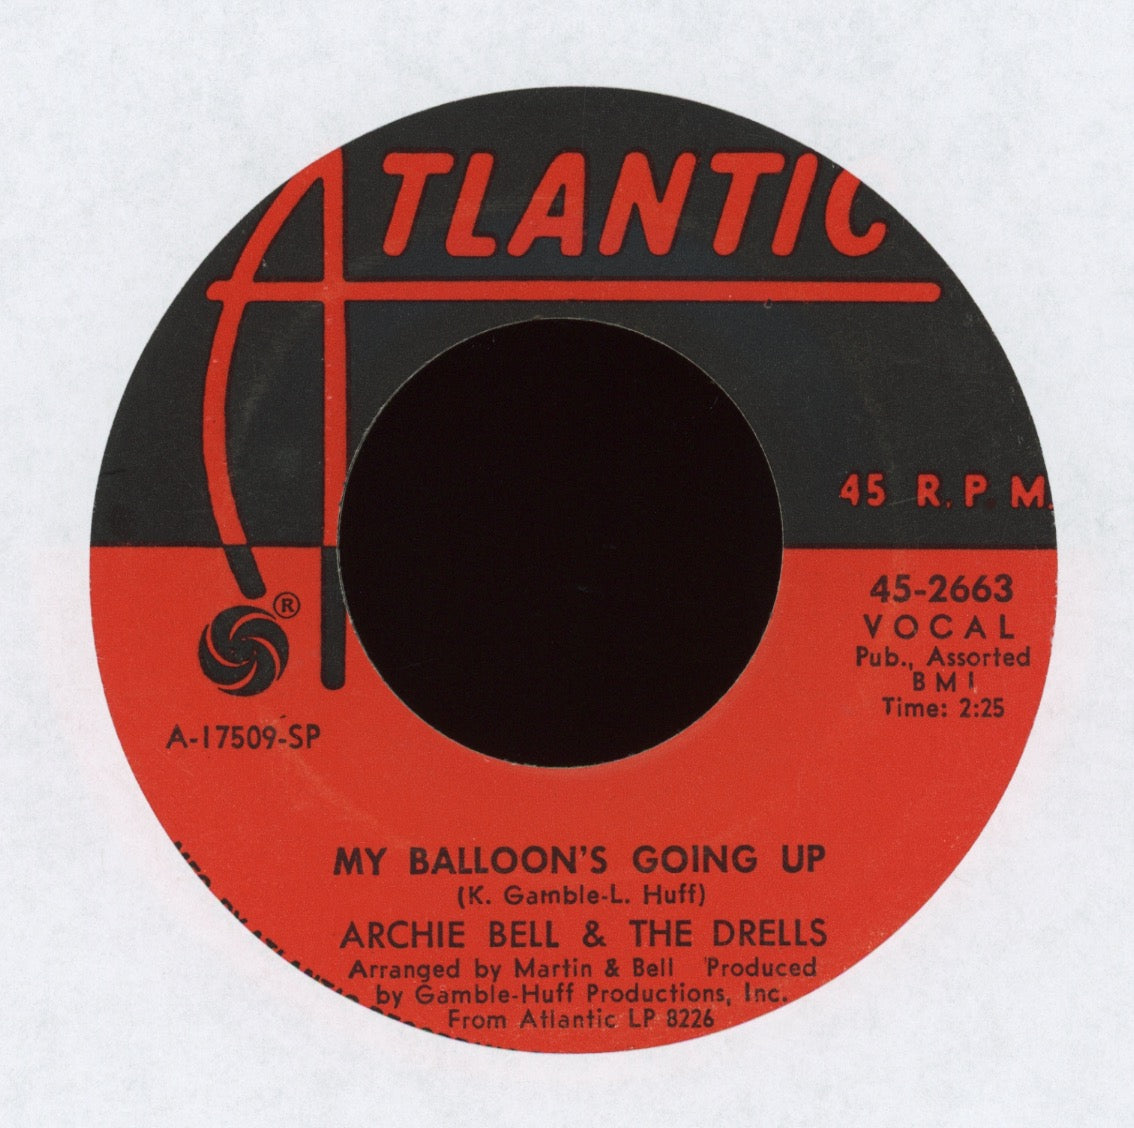 Archie Bell & The Drells - My Balloon's Going Up on Atlantic